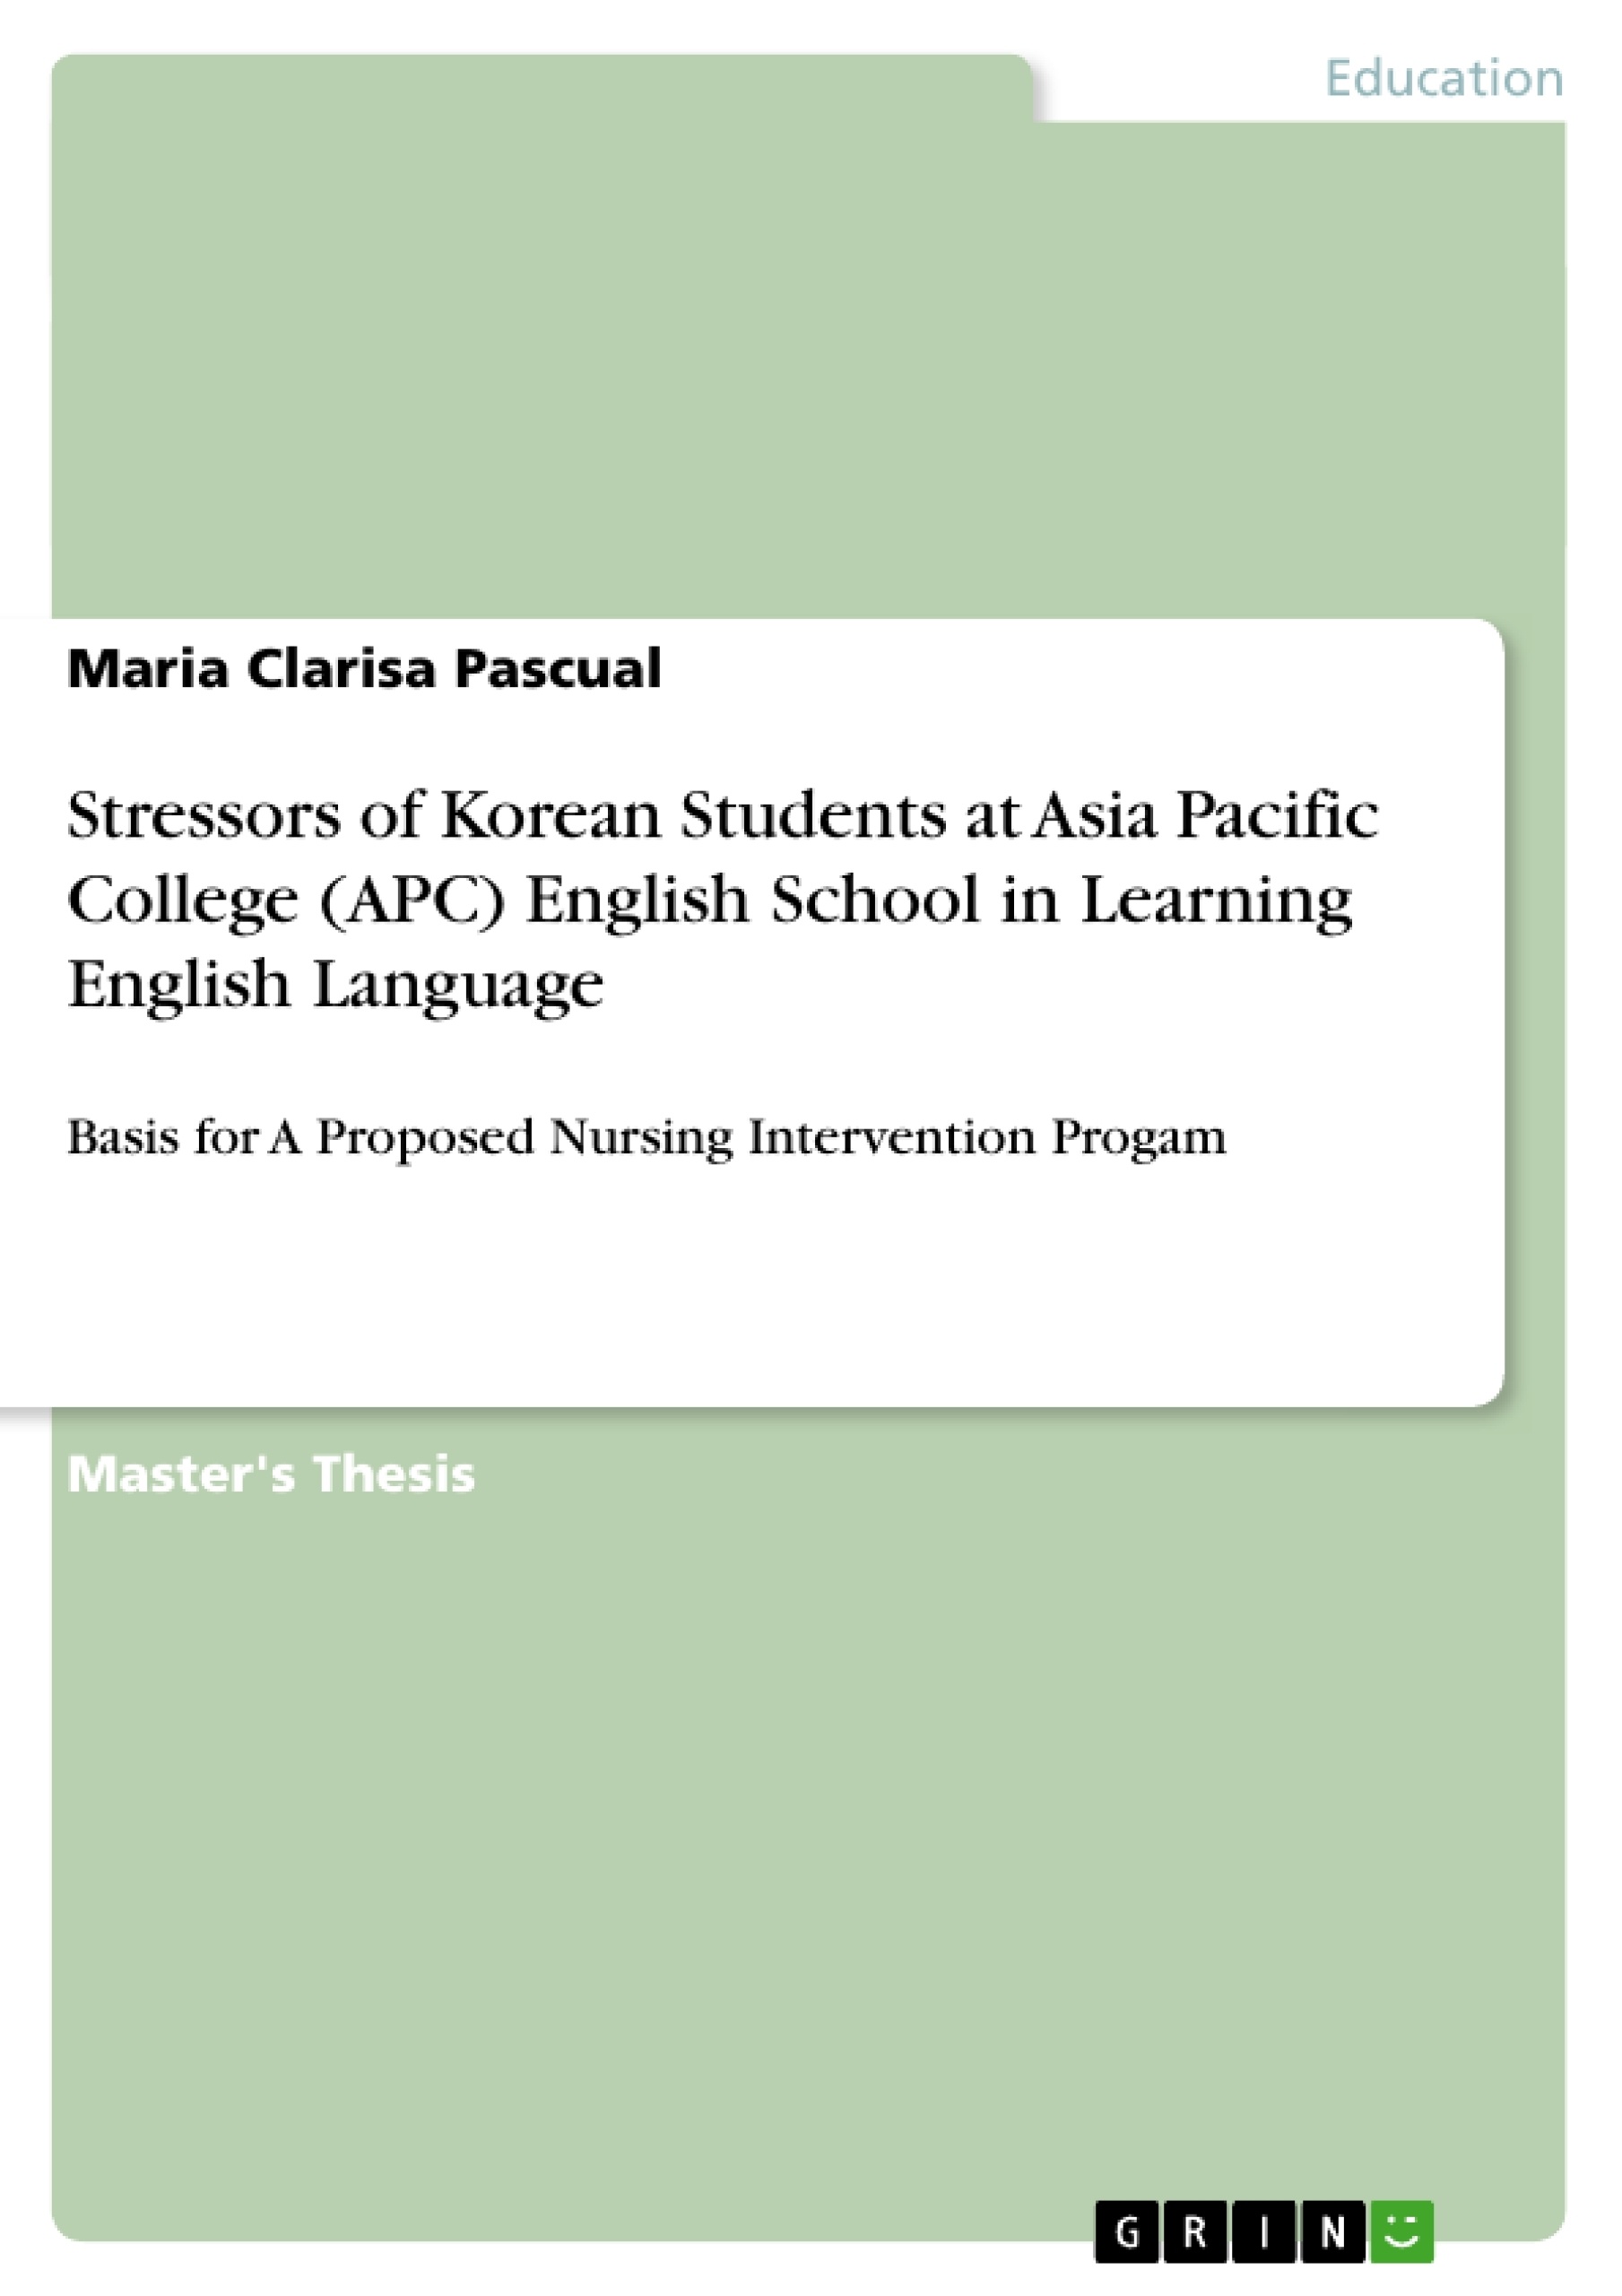 Title: Stressors of Korean Students at Asia Pacific College (APC) English School in Learning English Language